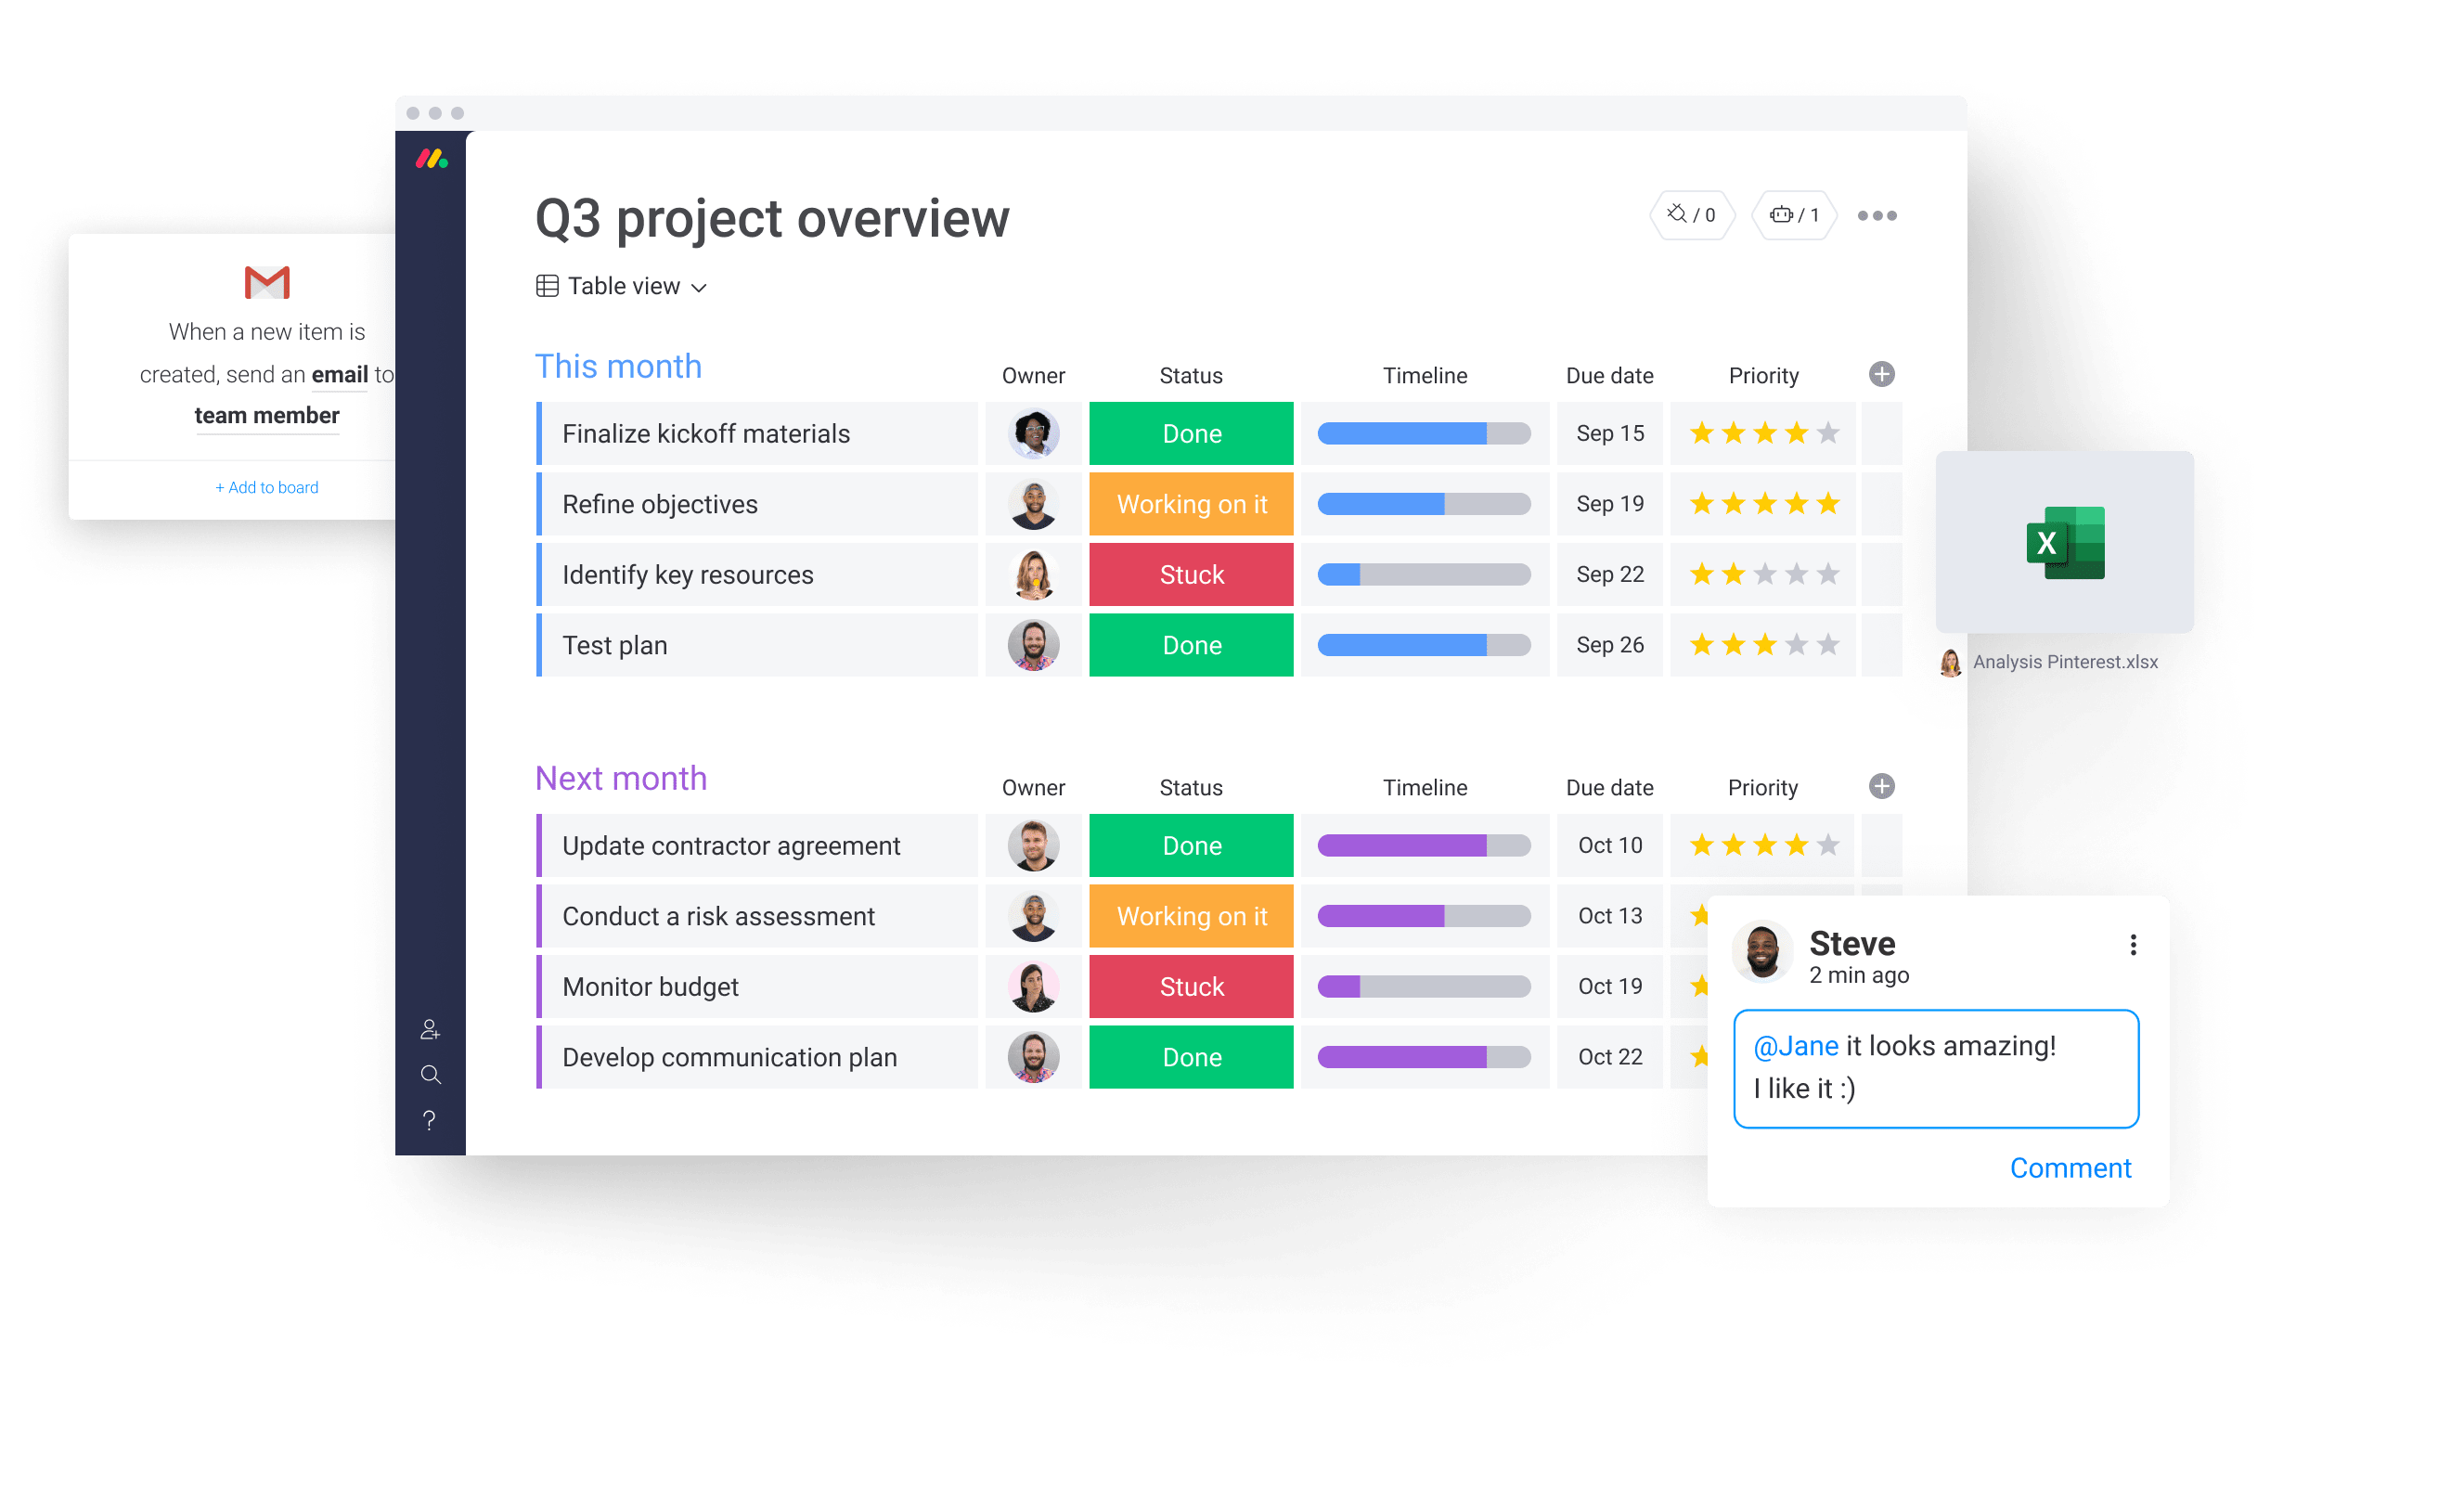 "Q3 project overview" board, with updates, notifications and file sharing